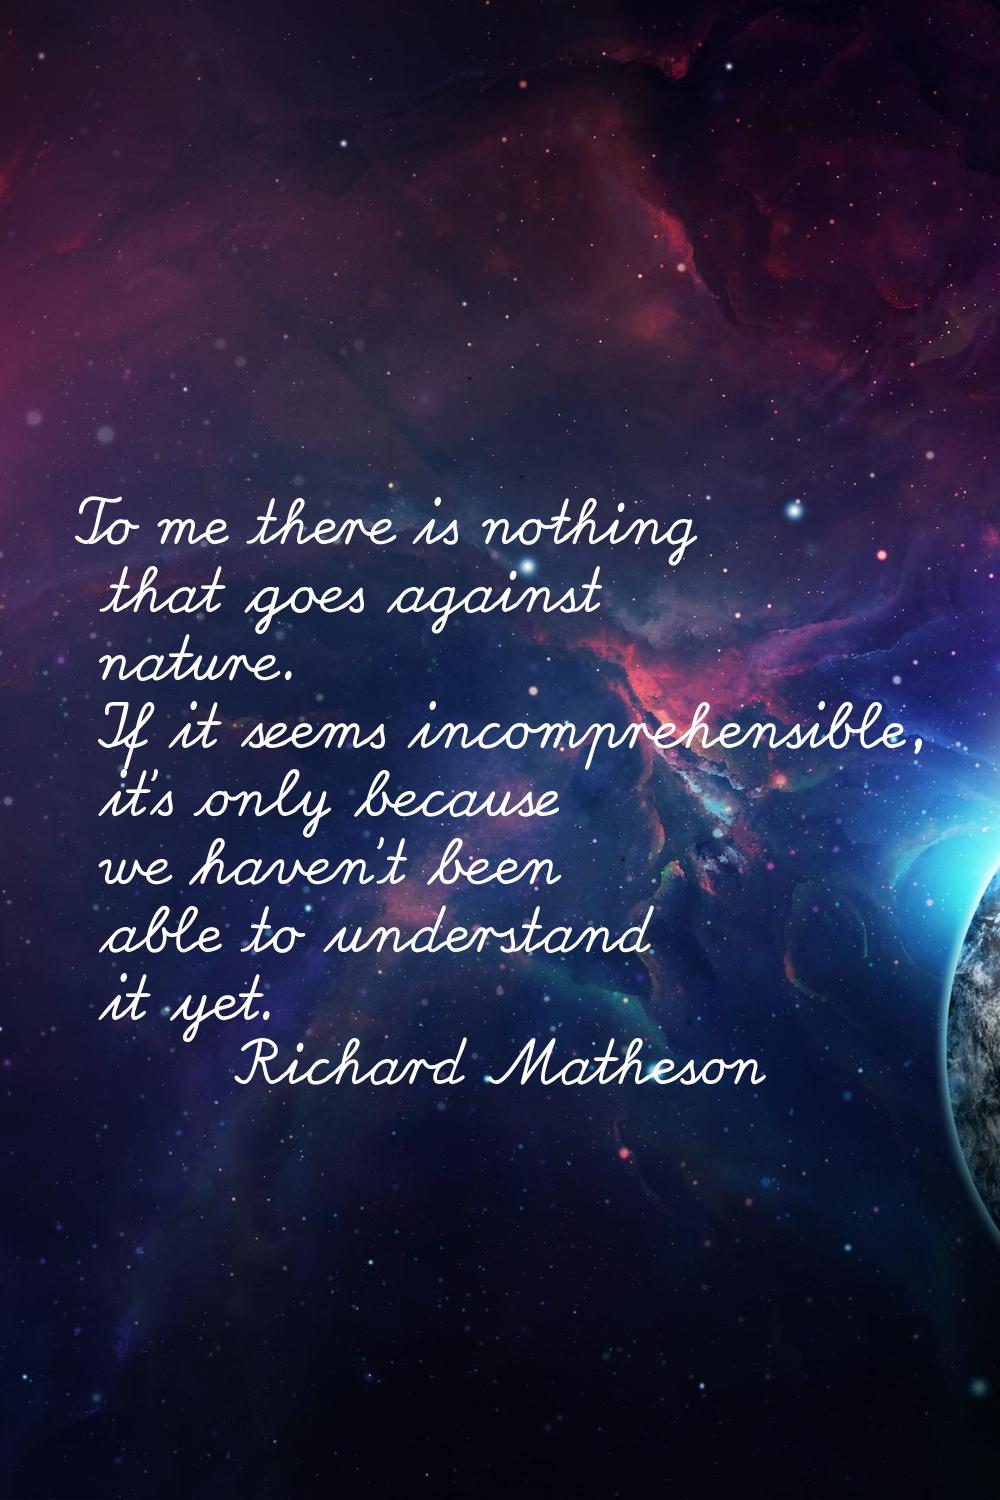 To me there is nothing that goes against nature. If it seems incomprehensible, it's only because we